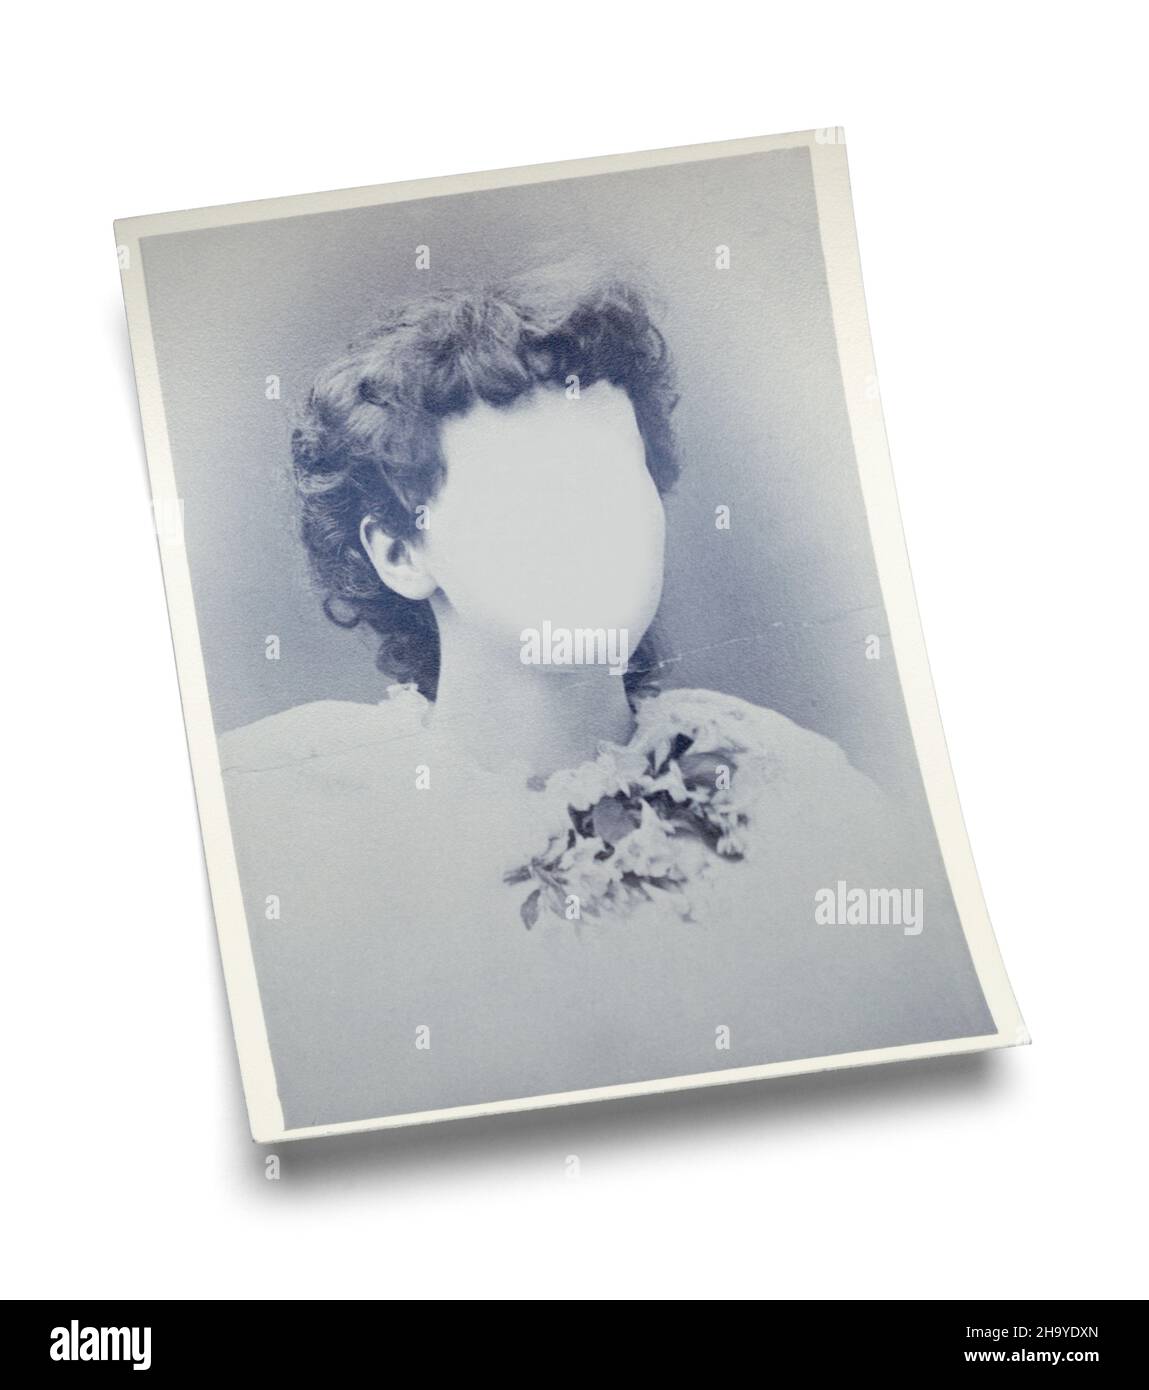 Vintage Photograph of Woman with Copy Space Cut Out on White. Stock Photo